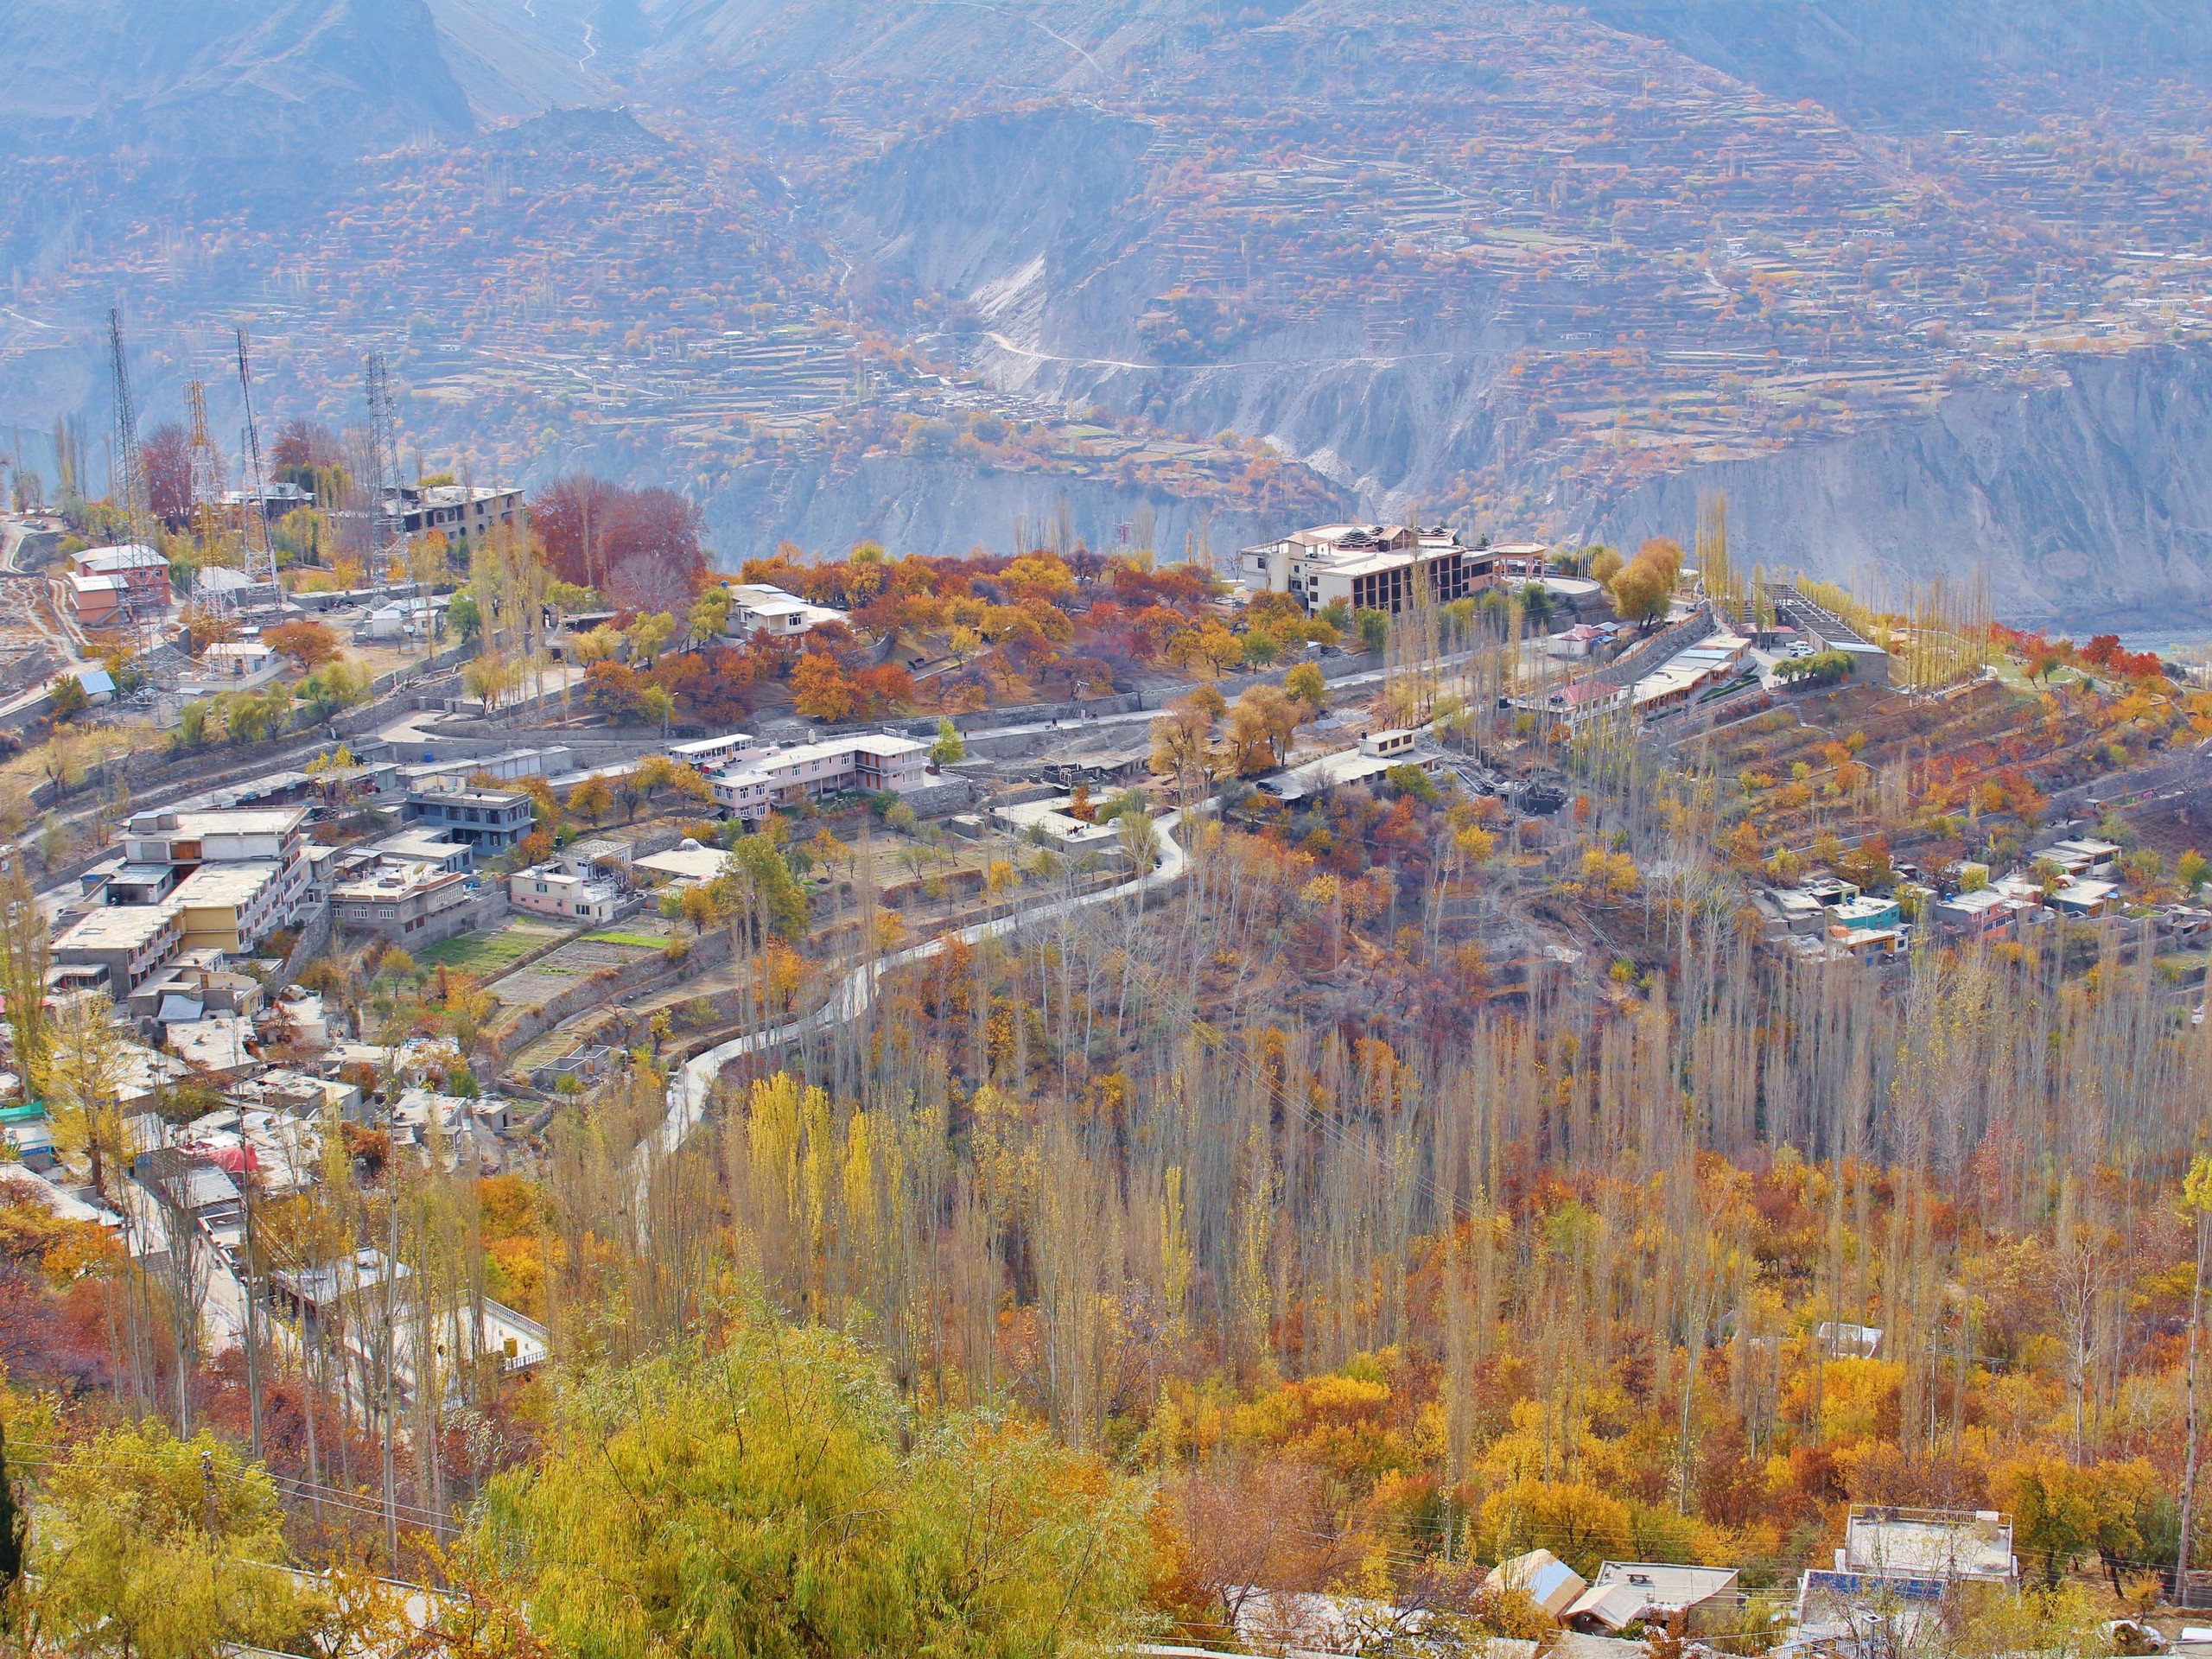 Town in Hunza Valley, Pakistan